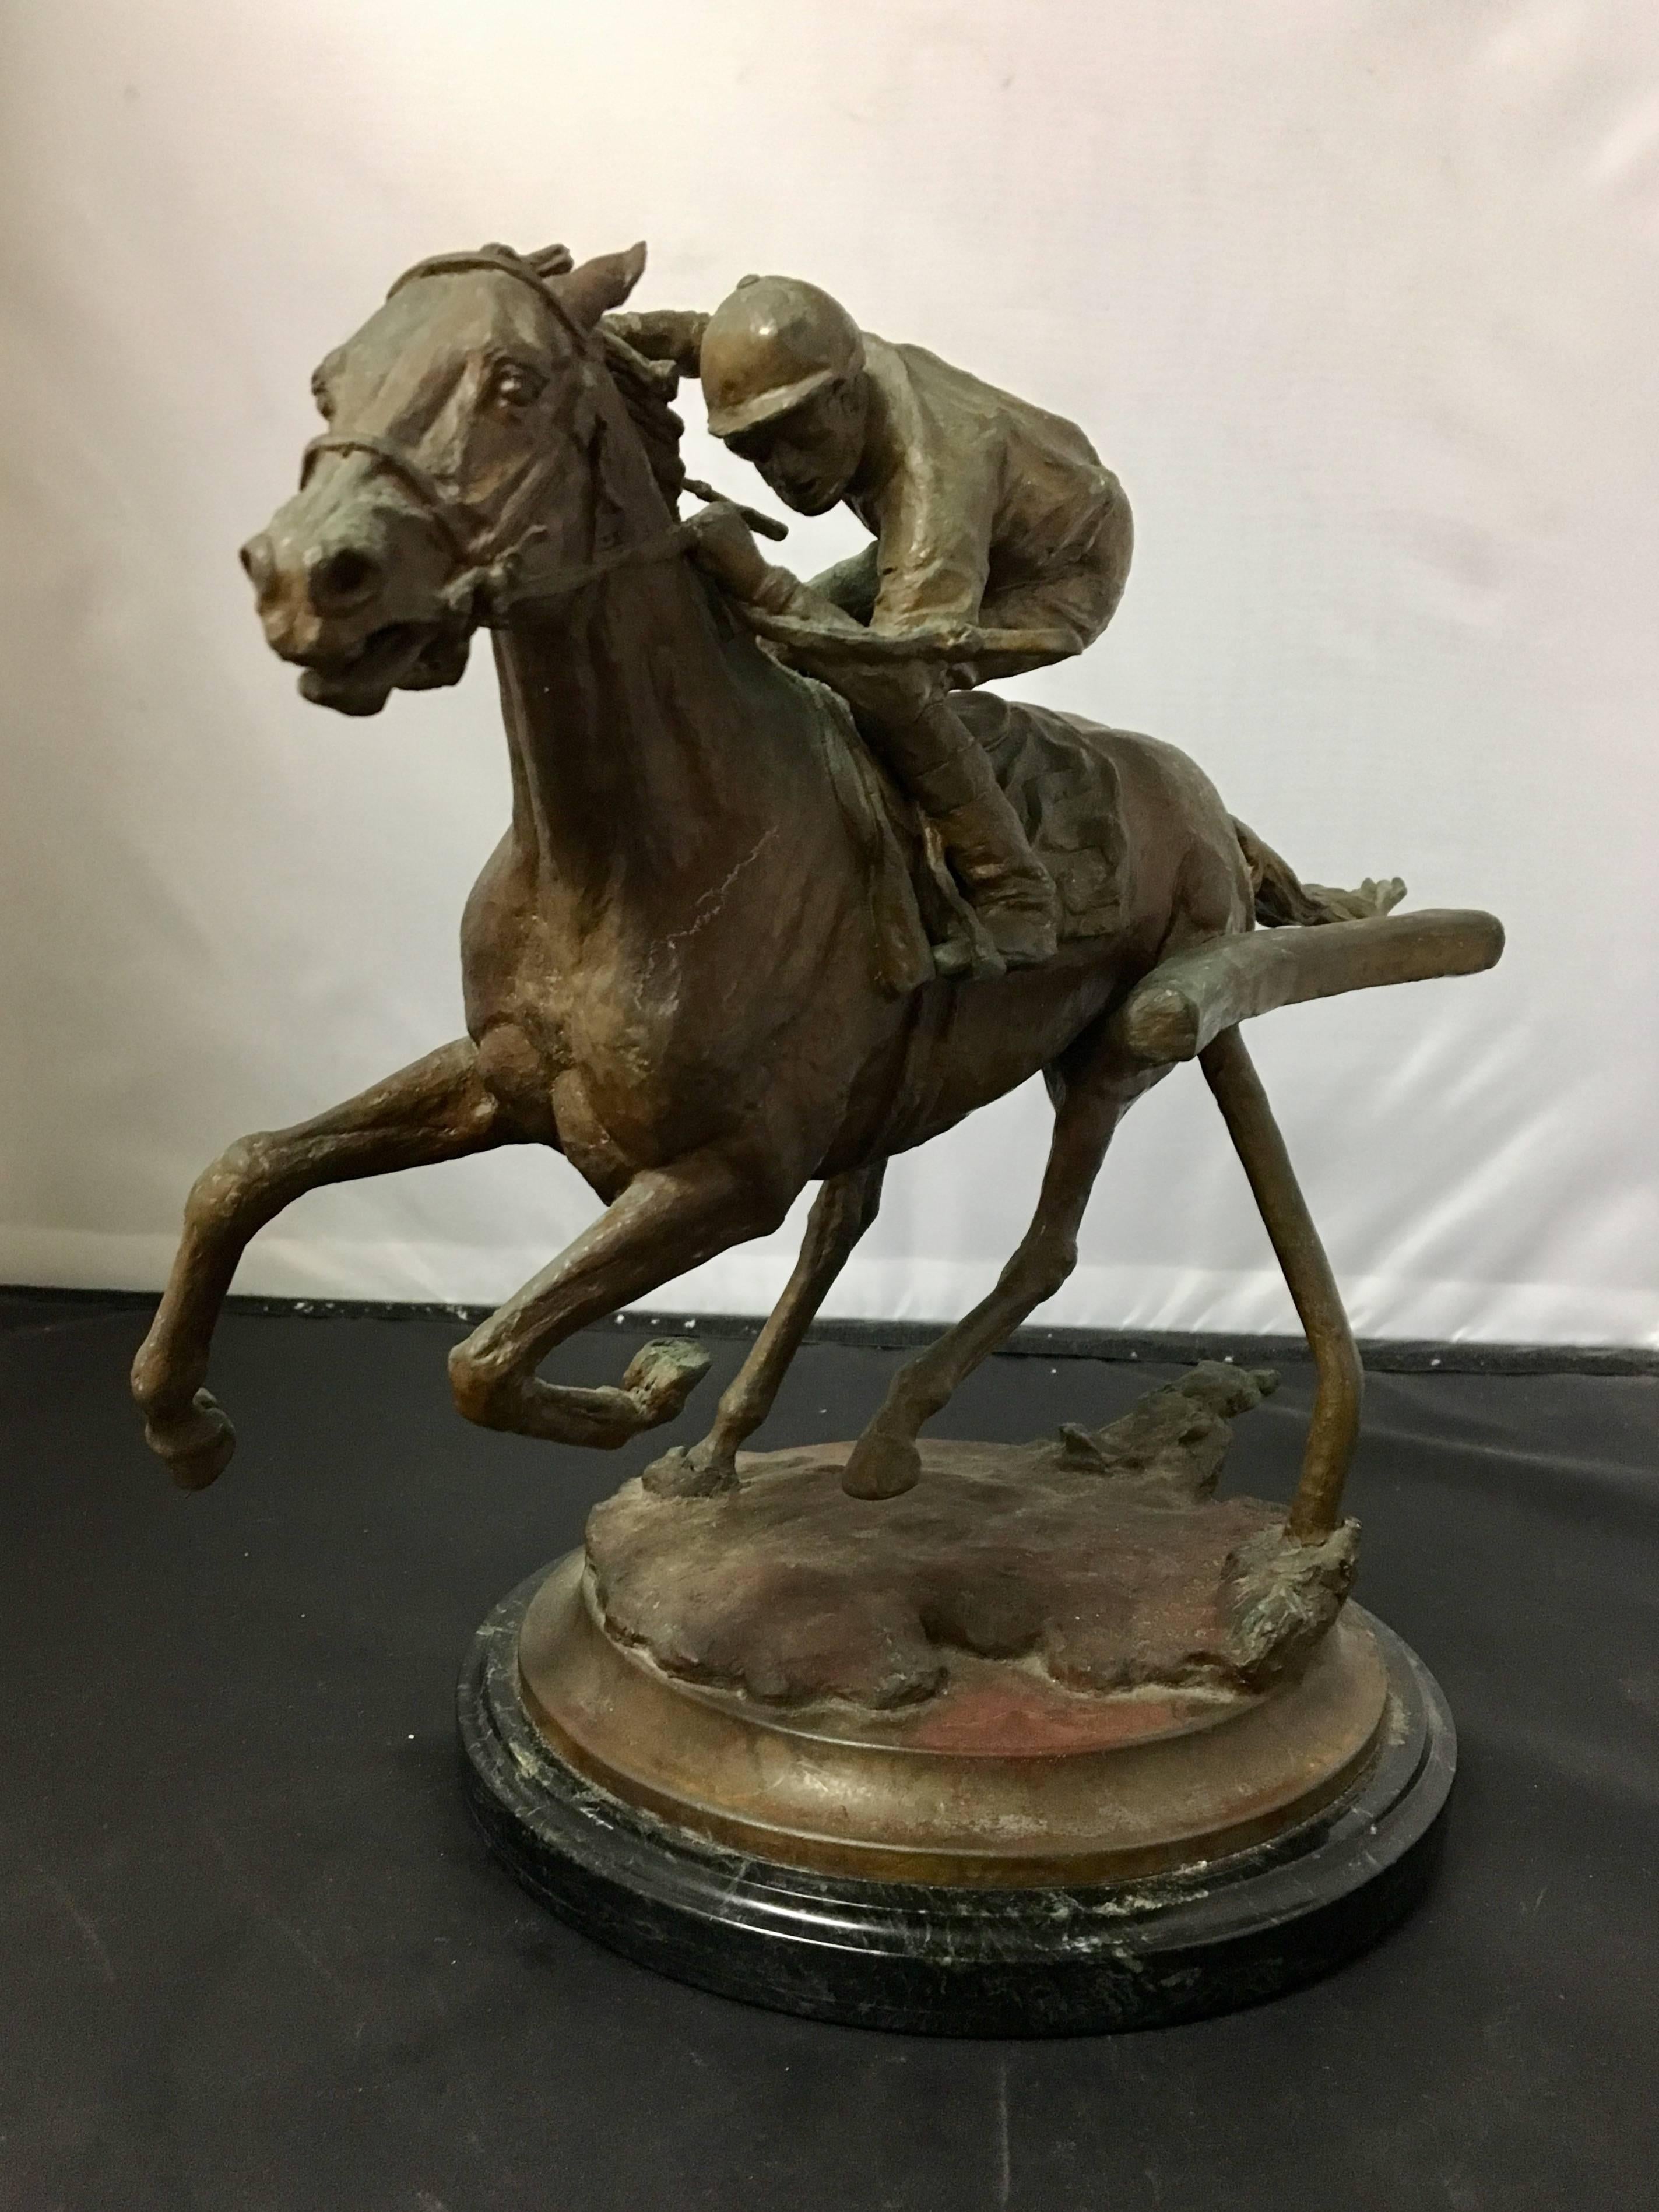 Exceptional bronze sculpture of a thoroughbred horse and jockey in full gallop by noted equine sculptor and artist Elizabeth Guarisco. The piece is signed and dated "1990"; it is also numbered 13/24. The sculpture sits on an 8.5"